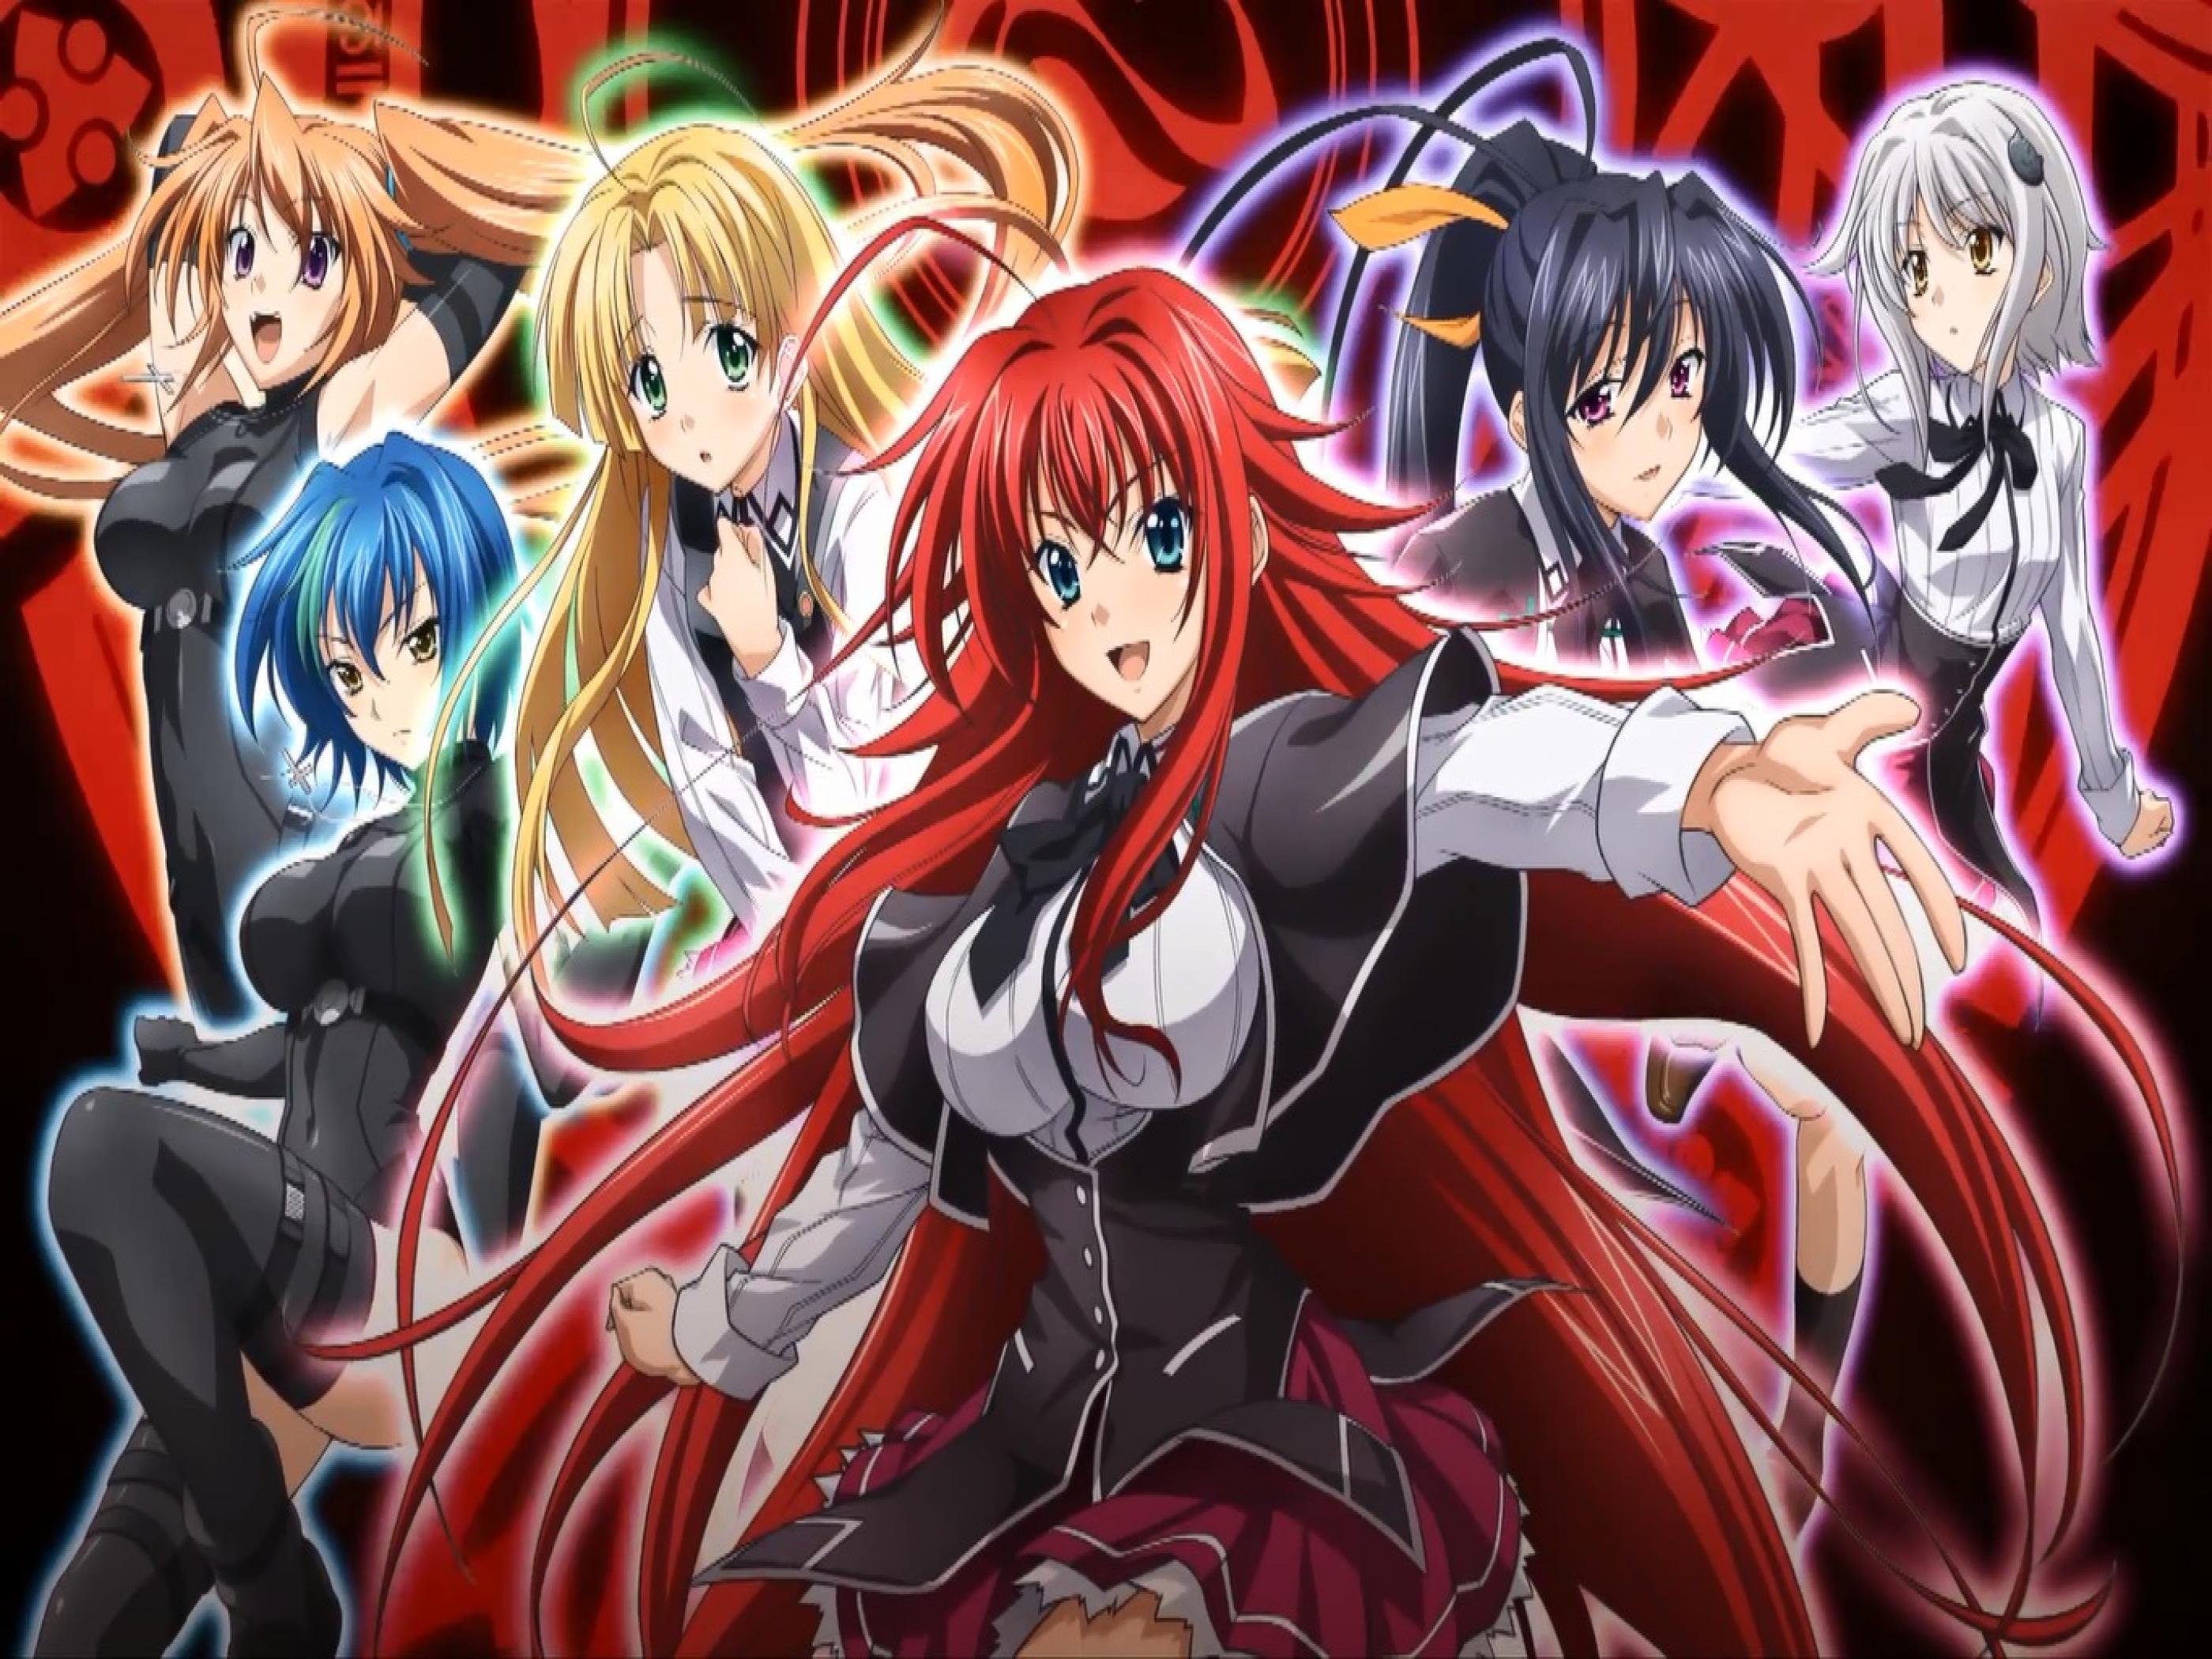 Download Rias Gremory Live Wallpaper for desktop or mobile device Make  your device cooler and more beautiful  Dxd Anime high school Highschool  dxd